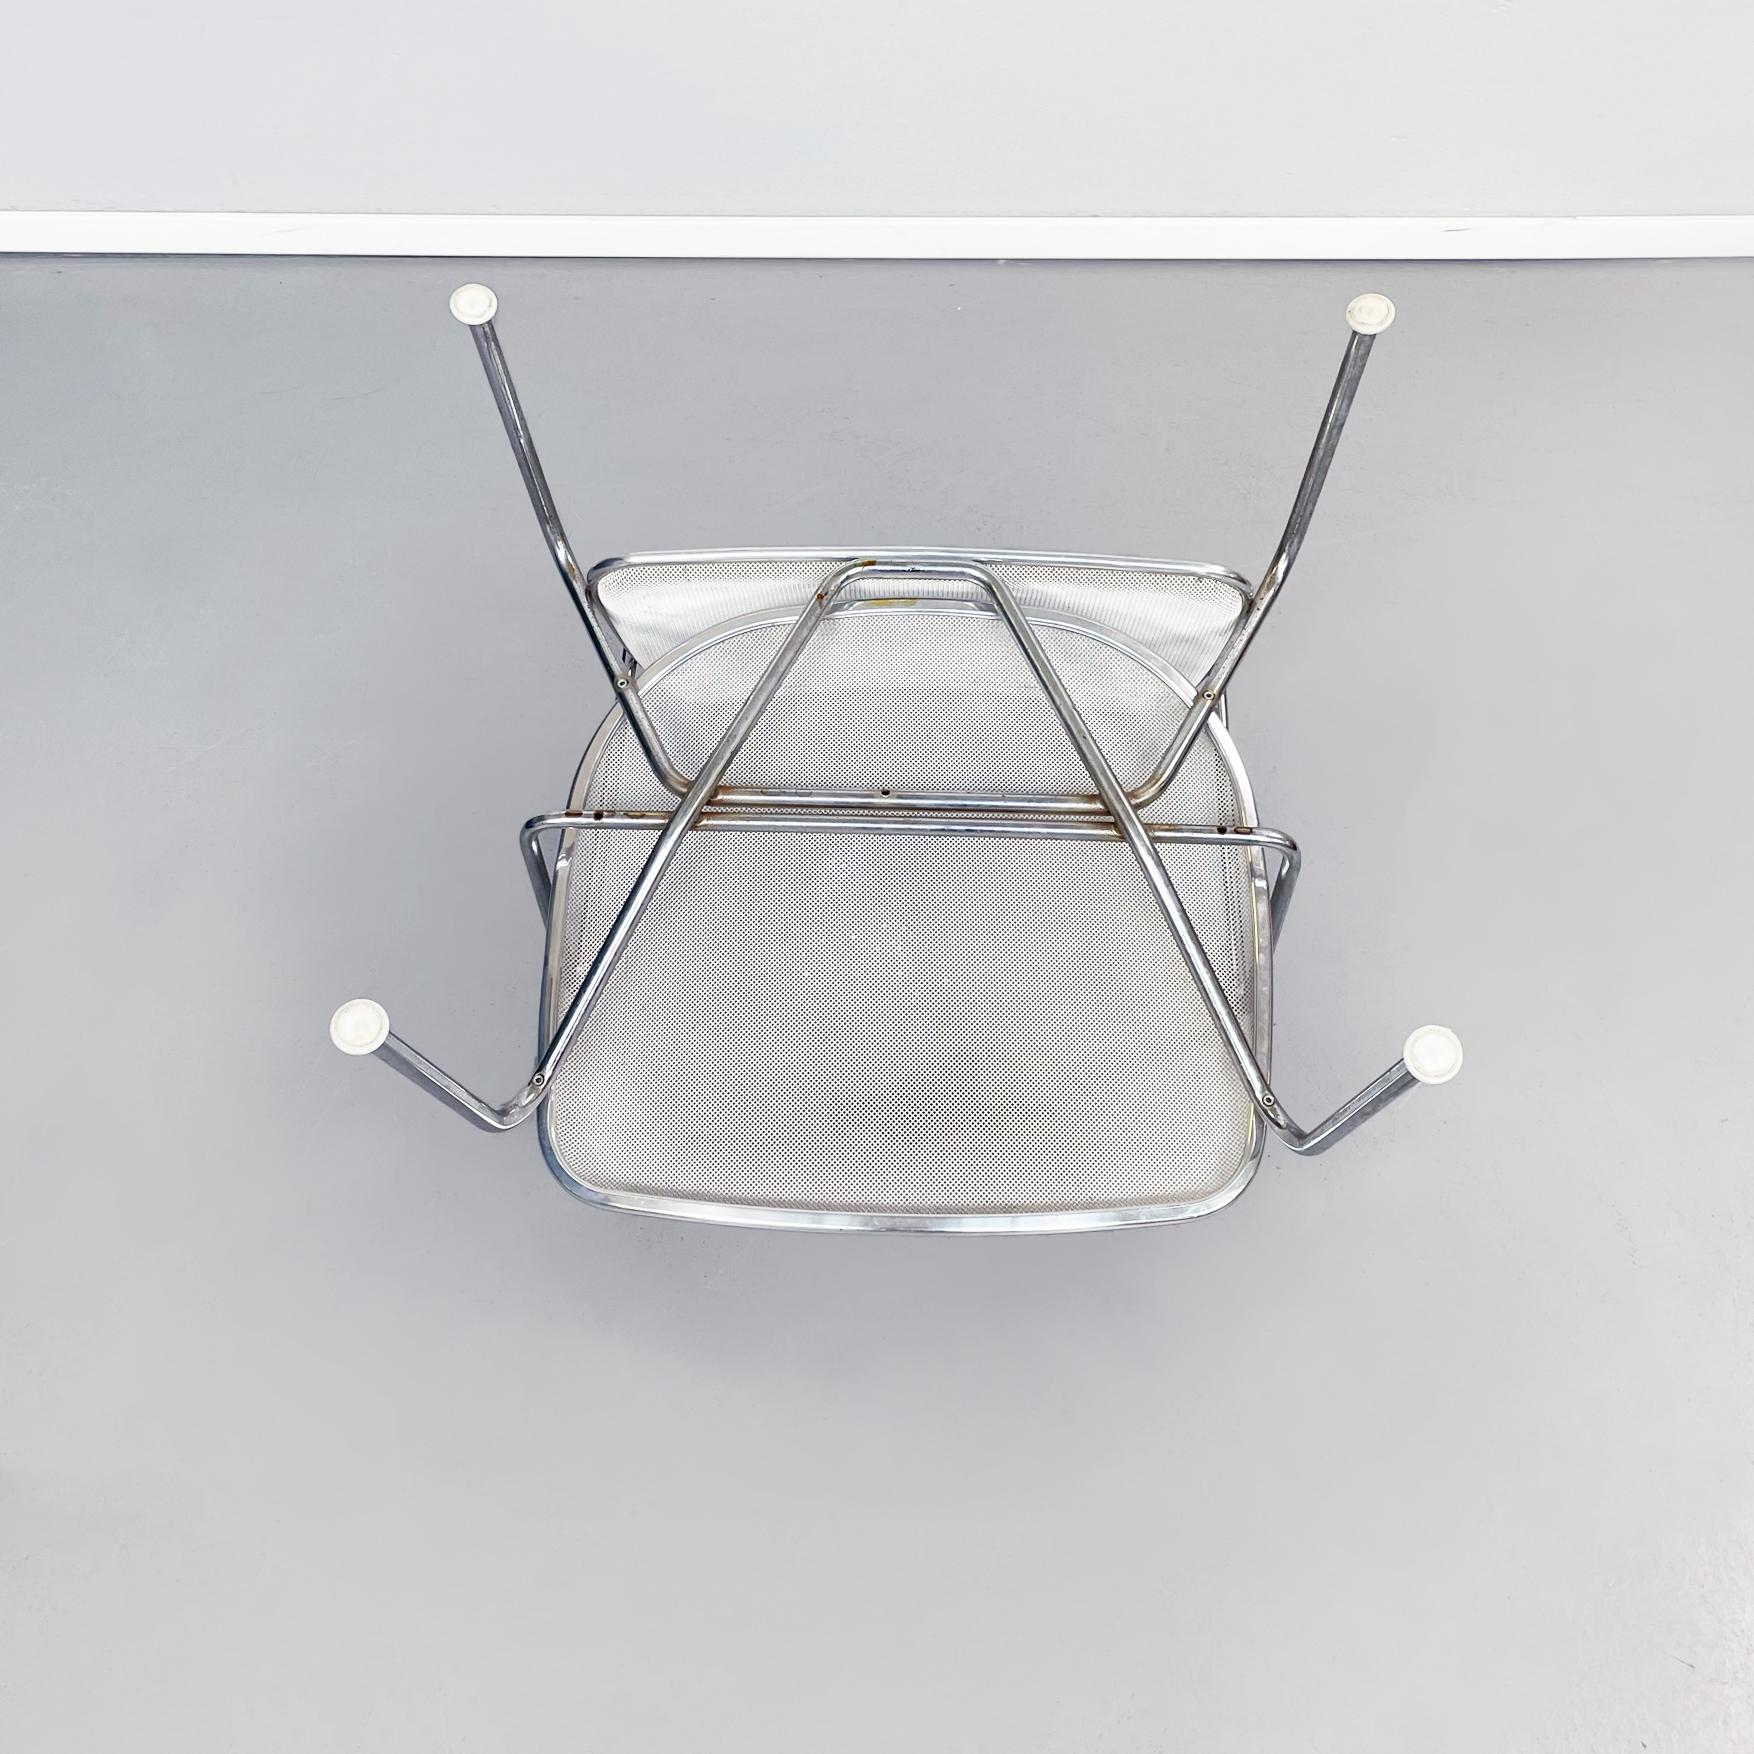 Italian 21st Century White Metal Steel Web Armchairs by Citterio for B&B, 2000s For Sale 13